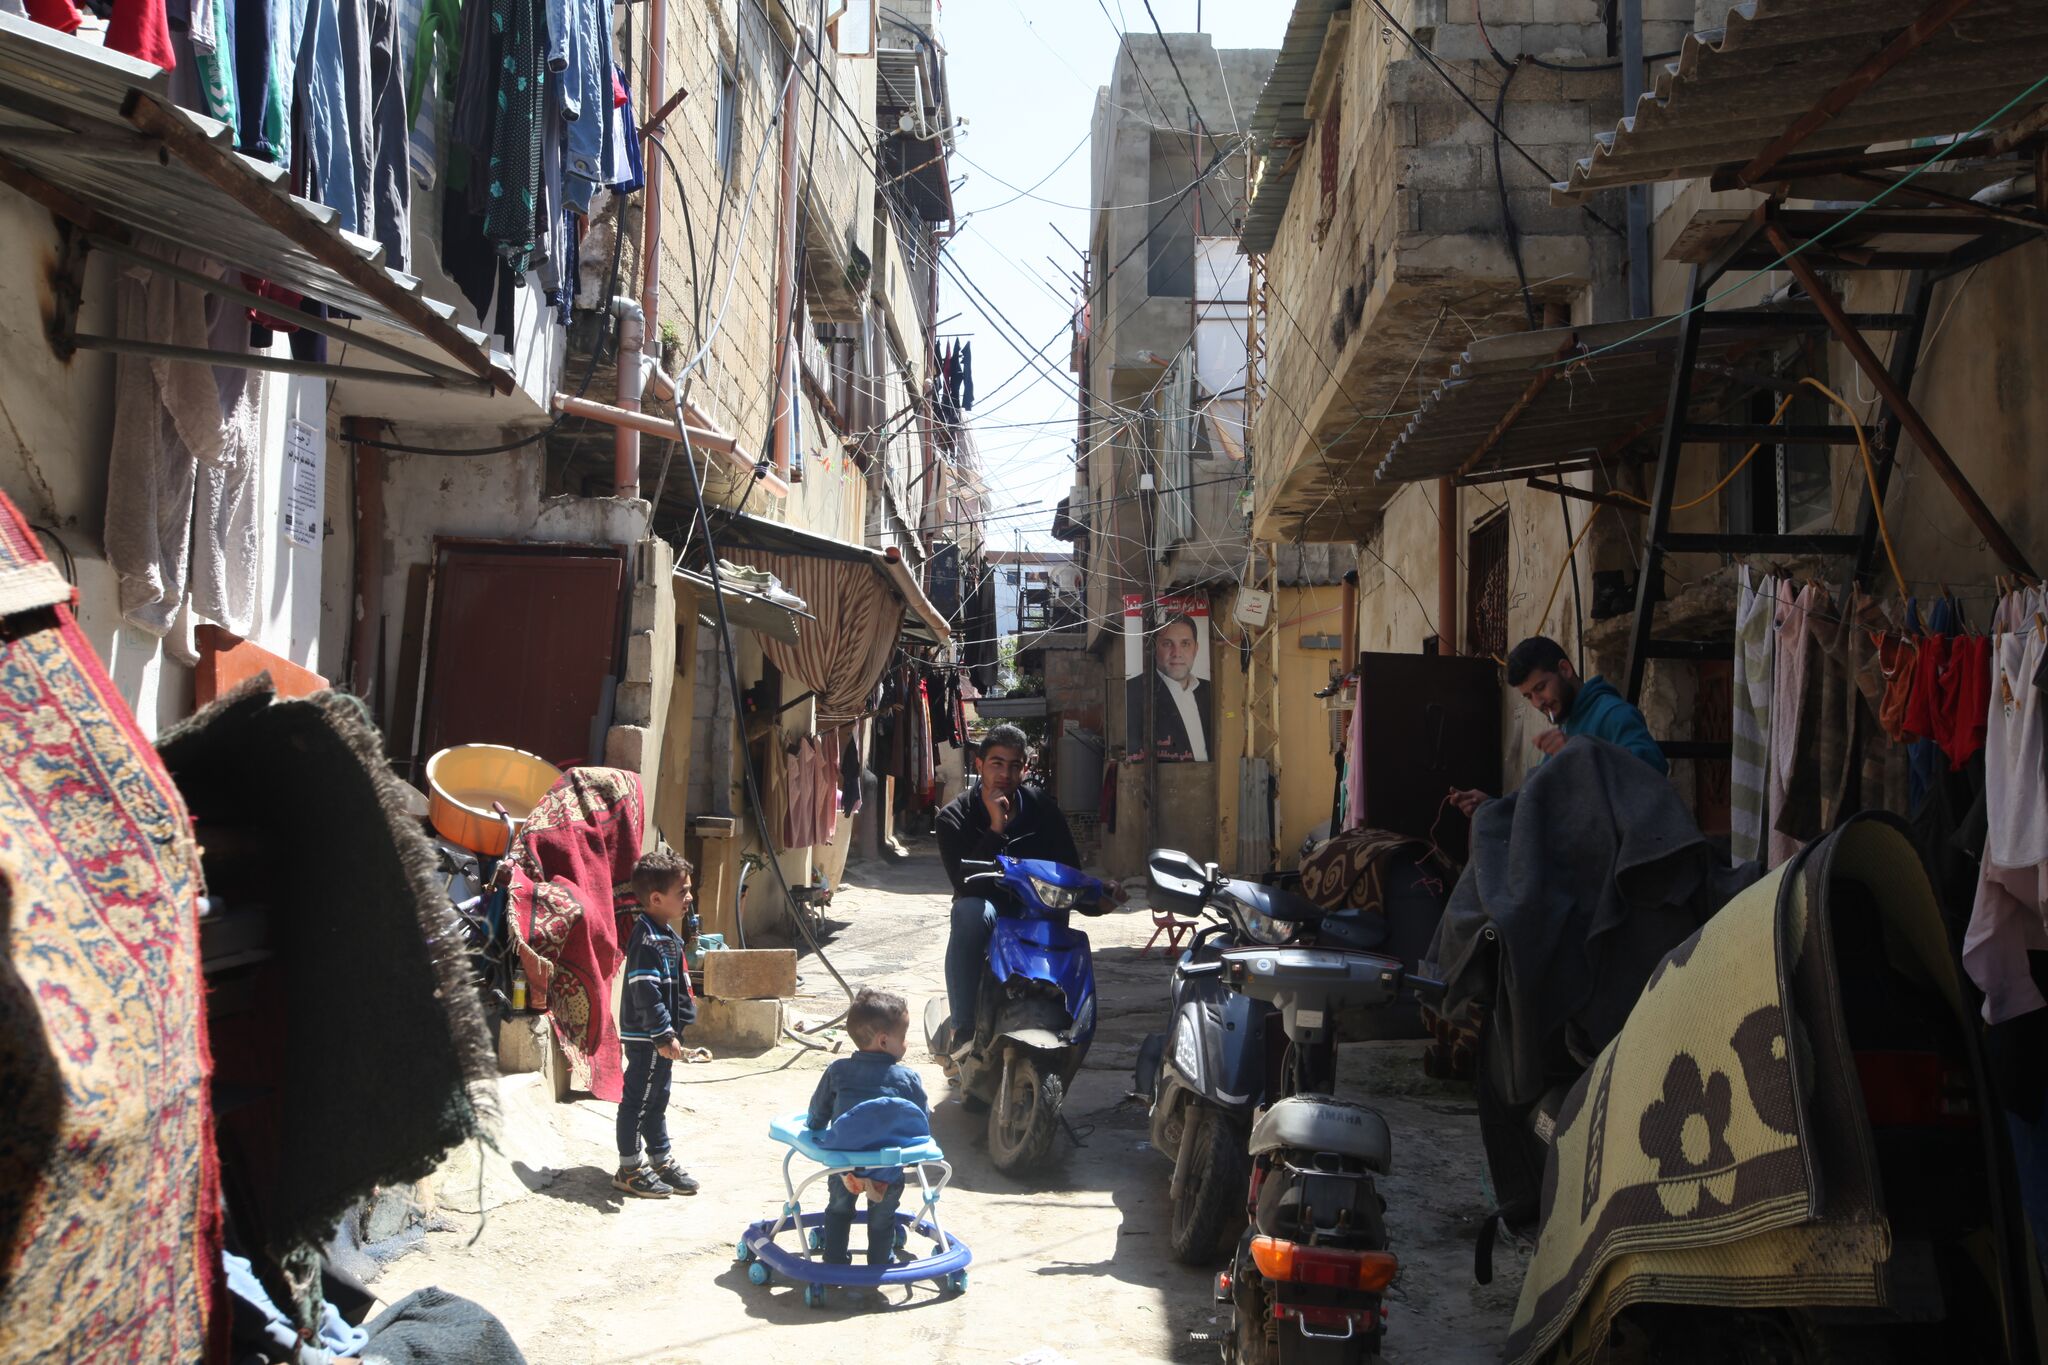 Policy of Destitution has Led to Undignified Living in Lebanon’s al-Mankoubin District